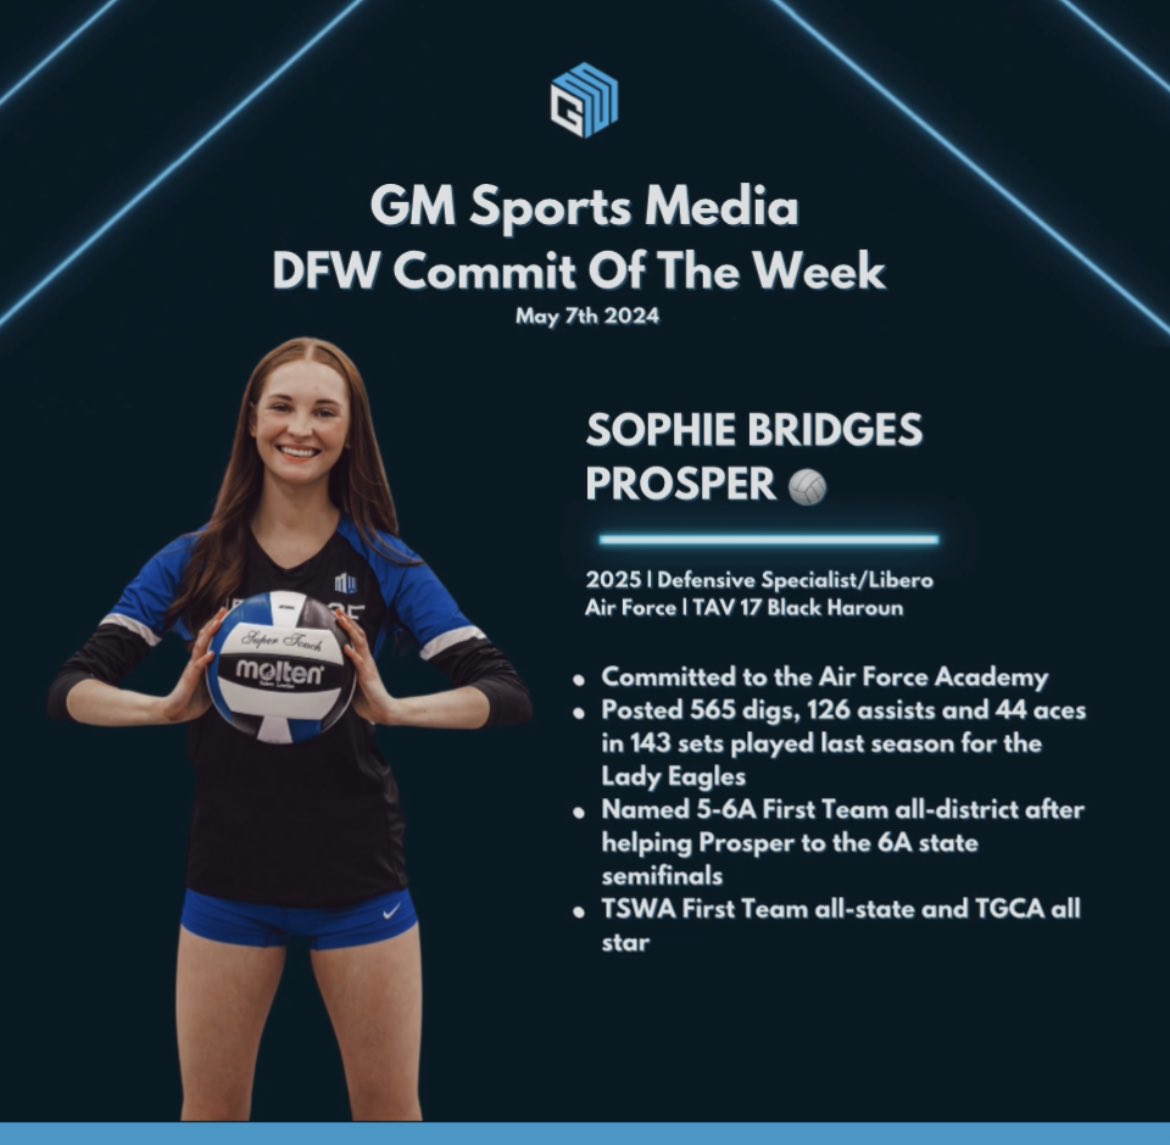 GM SPORTS MEDIA DFW COMMIT OF THE WEEK ‼️‼️ May 7th 2024 SOPHIE BRIDGES | PROSPER 🏐 2025 DS/L | Air Force ⭐️ The Eagles reached the 6A state semifinals ⭐️ 1st team all district, 1st team all state and a TGCA all star after posting 565 digs and 44 aces in 143 sets played